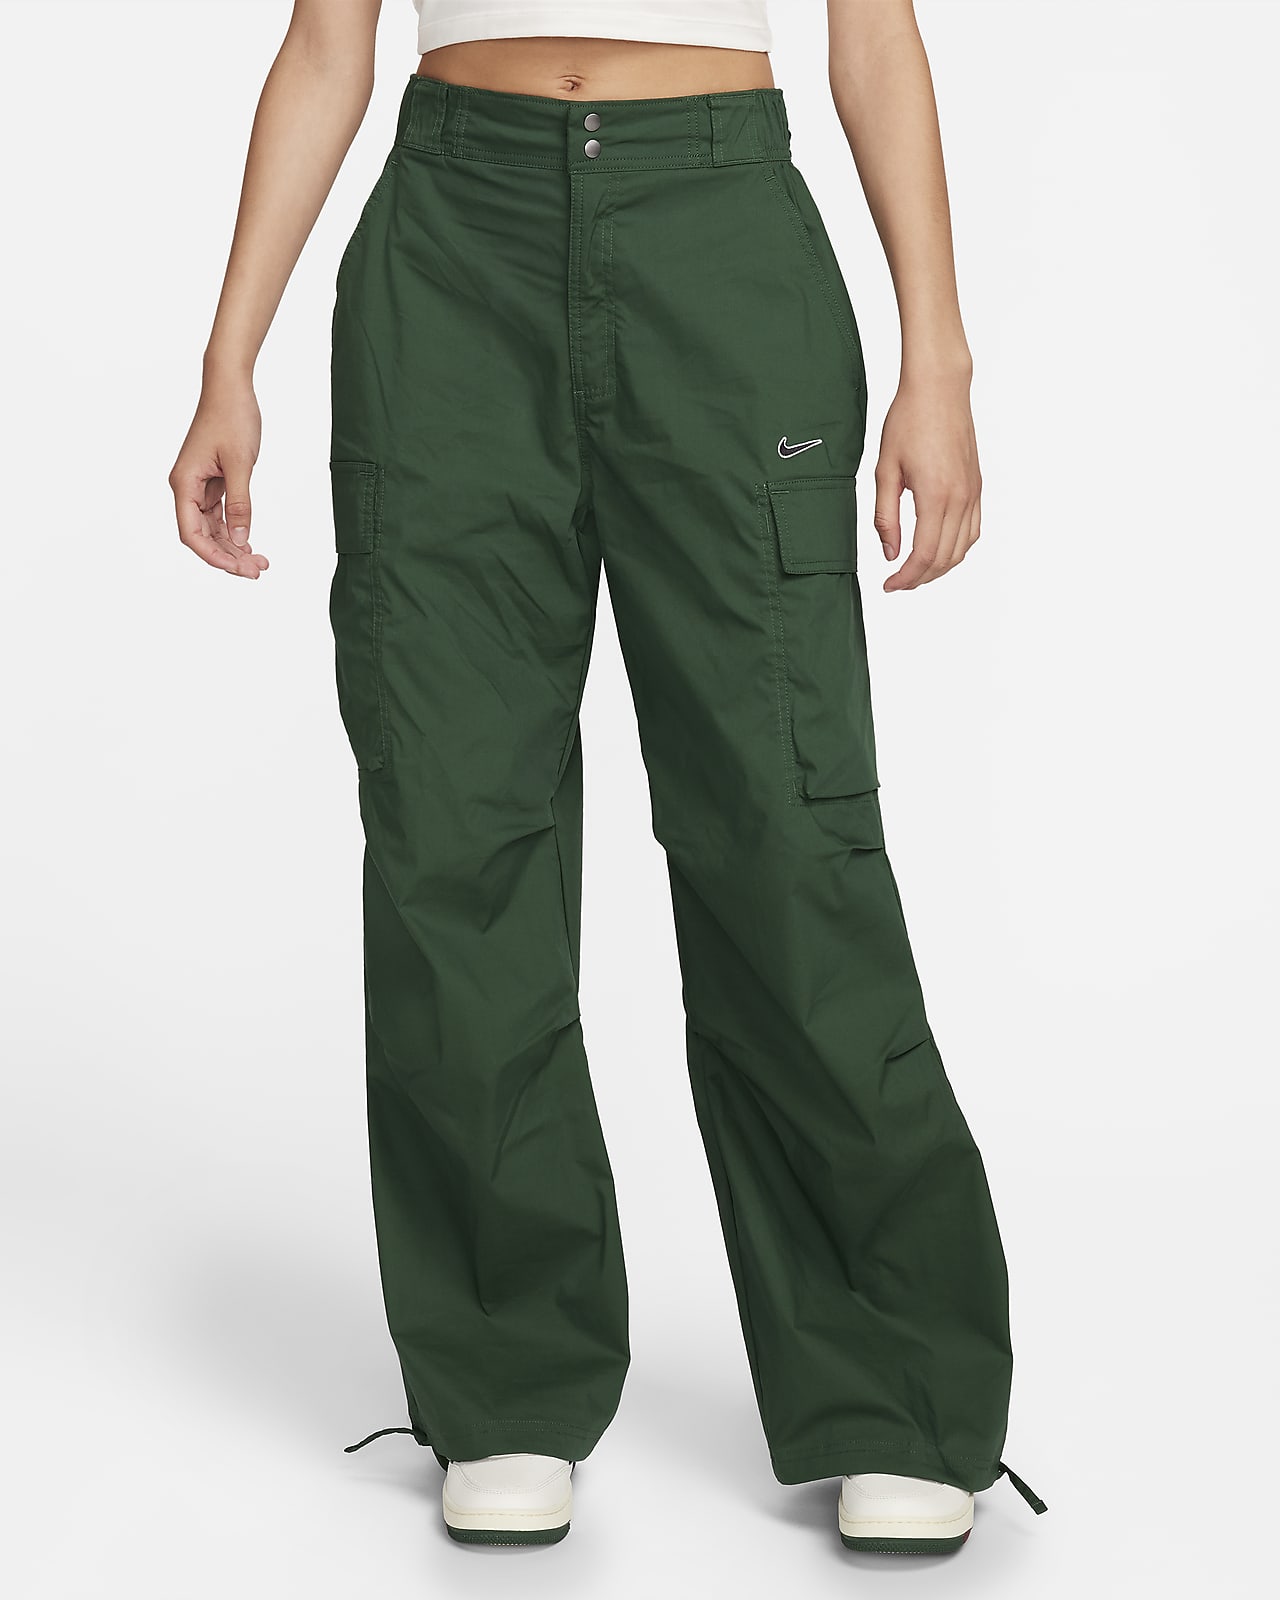 P.A.R.O.S.H. tiger-motif Embroidered Cargo Trousers - Farfetch